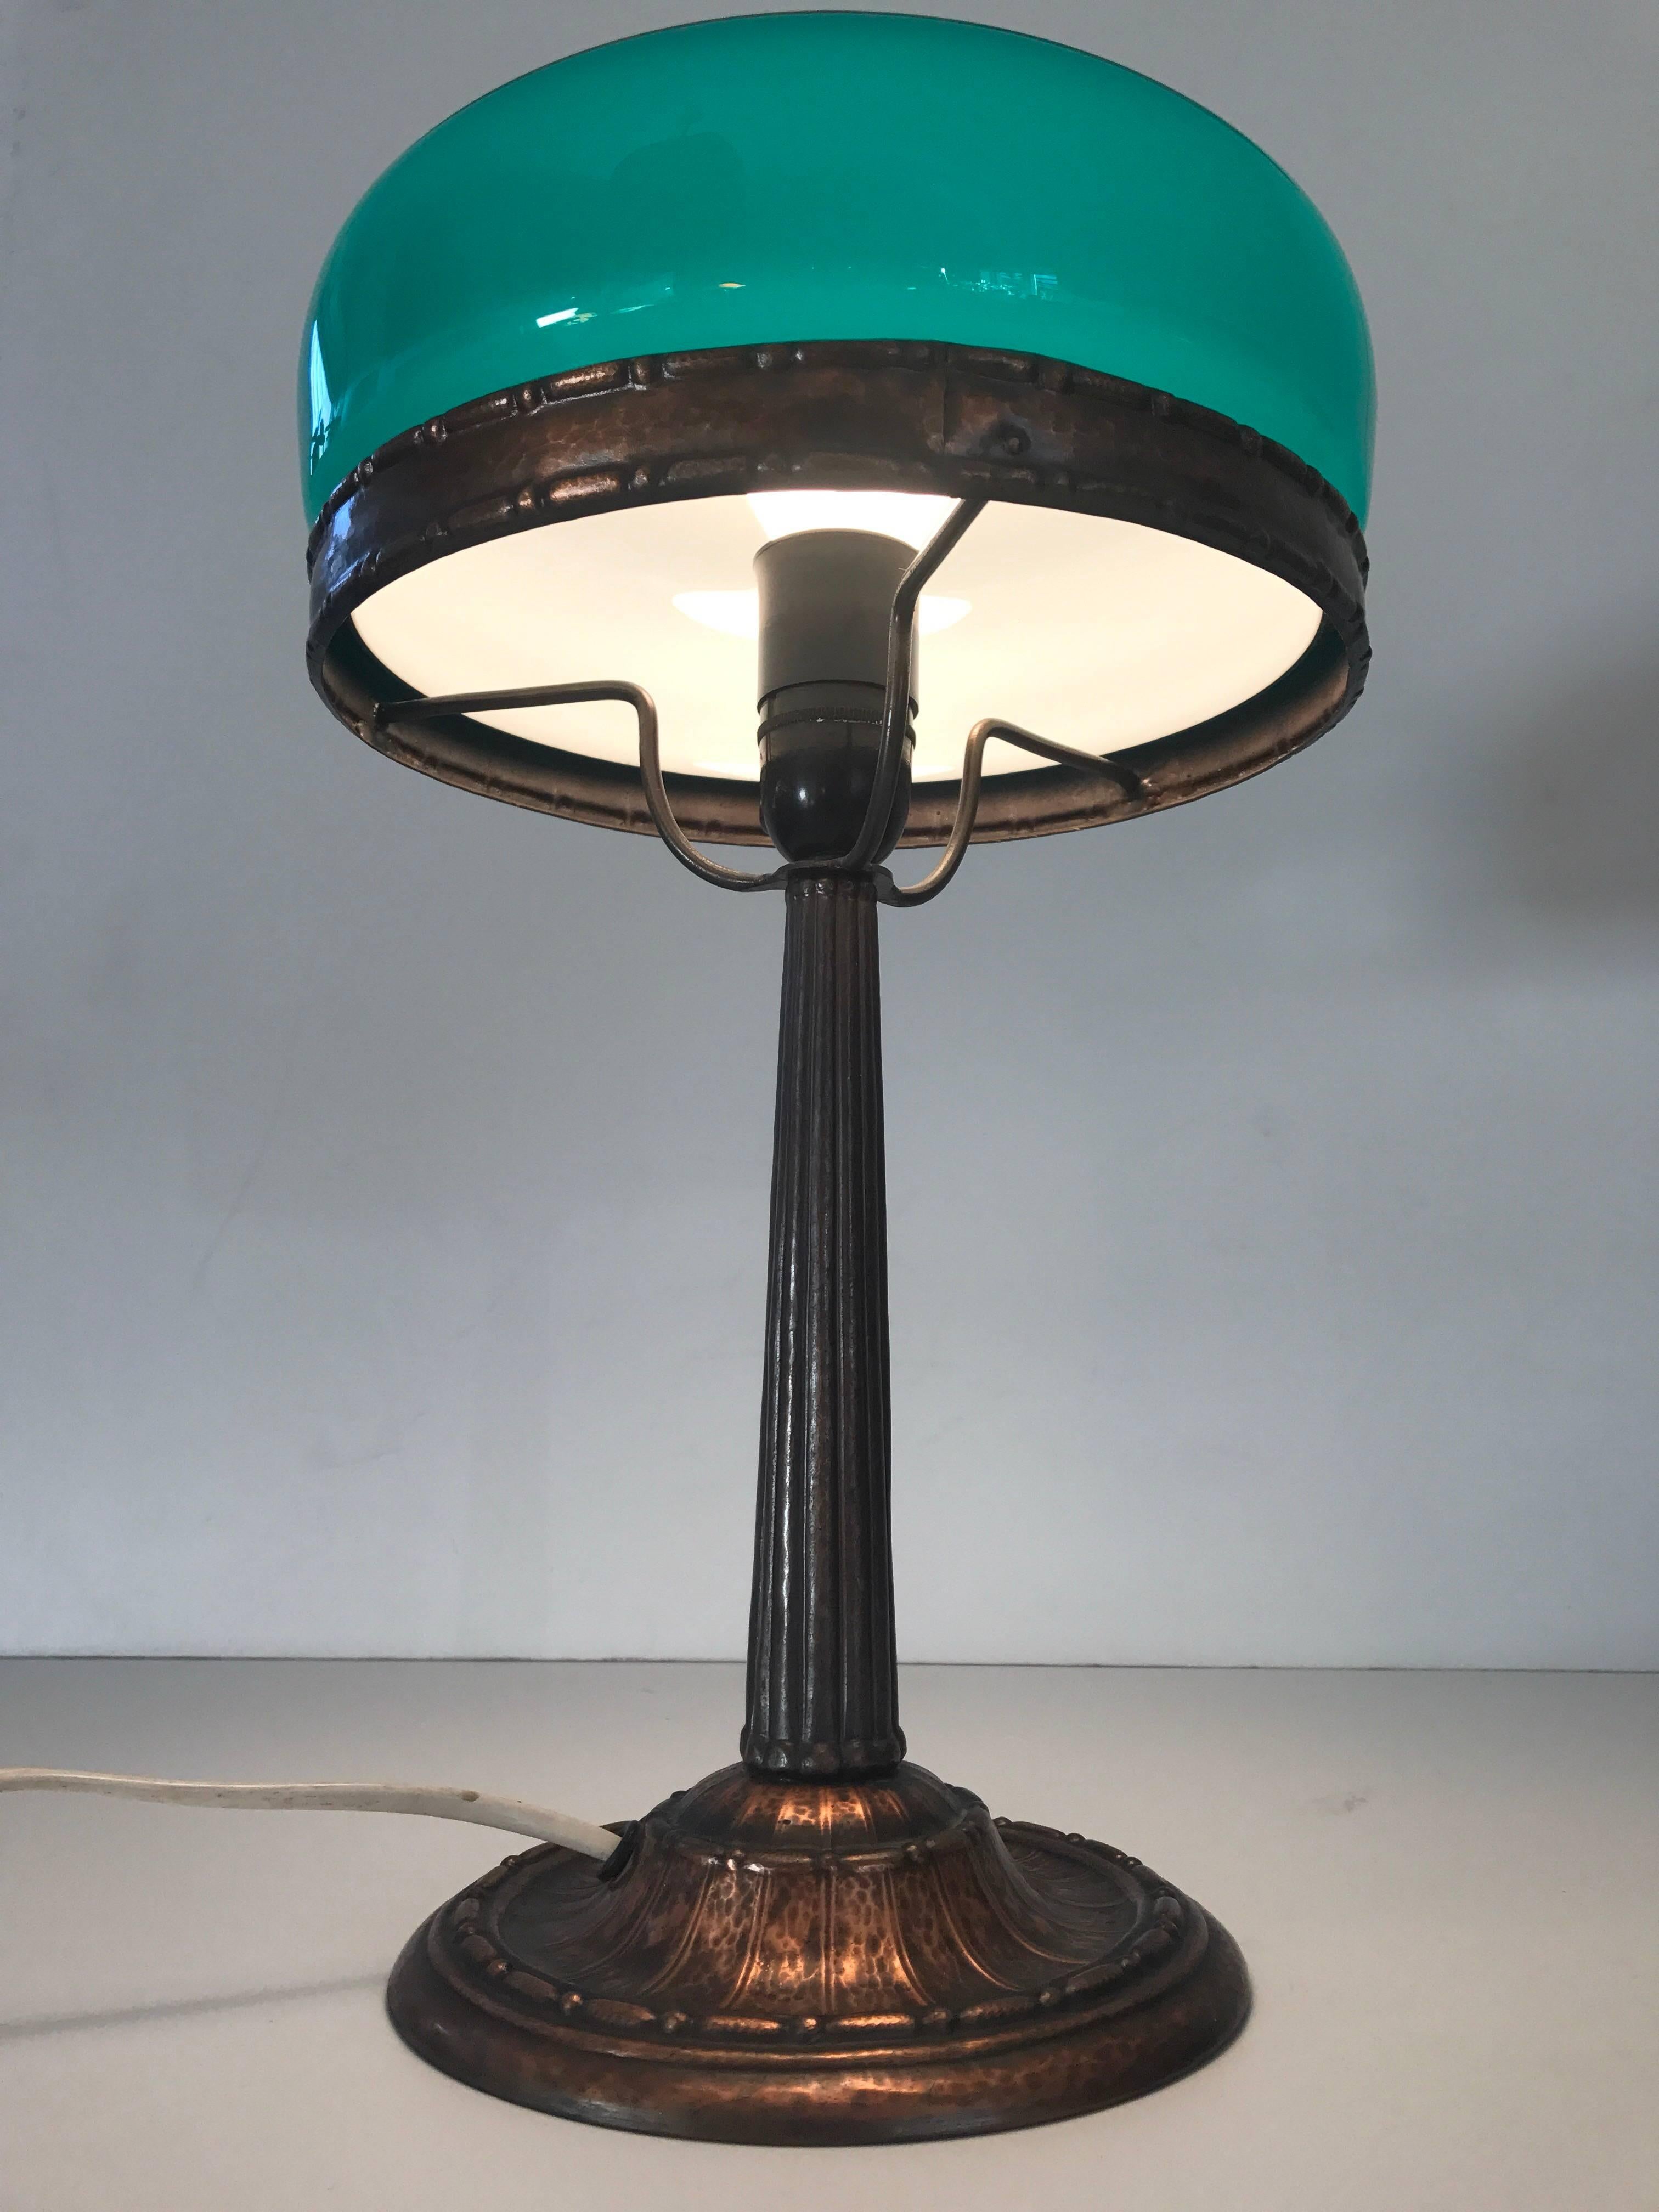 Swedish Art Nouveau Jugendstil 1920 copper and glass table lamp. A beautiful dark green blown glass shade most likely made at Pukeberg or Orrefors glass factory in the early 20th century. The copper has a very nice pattern and is of very high